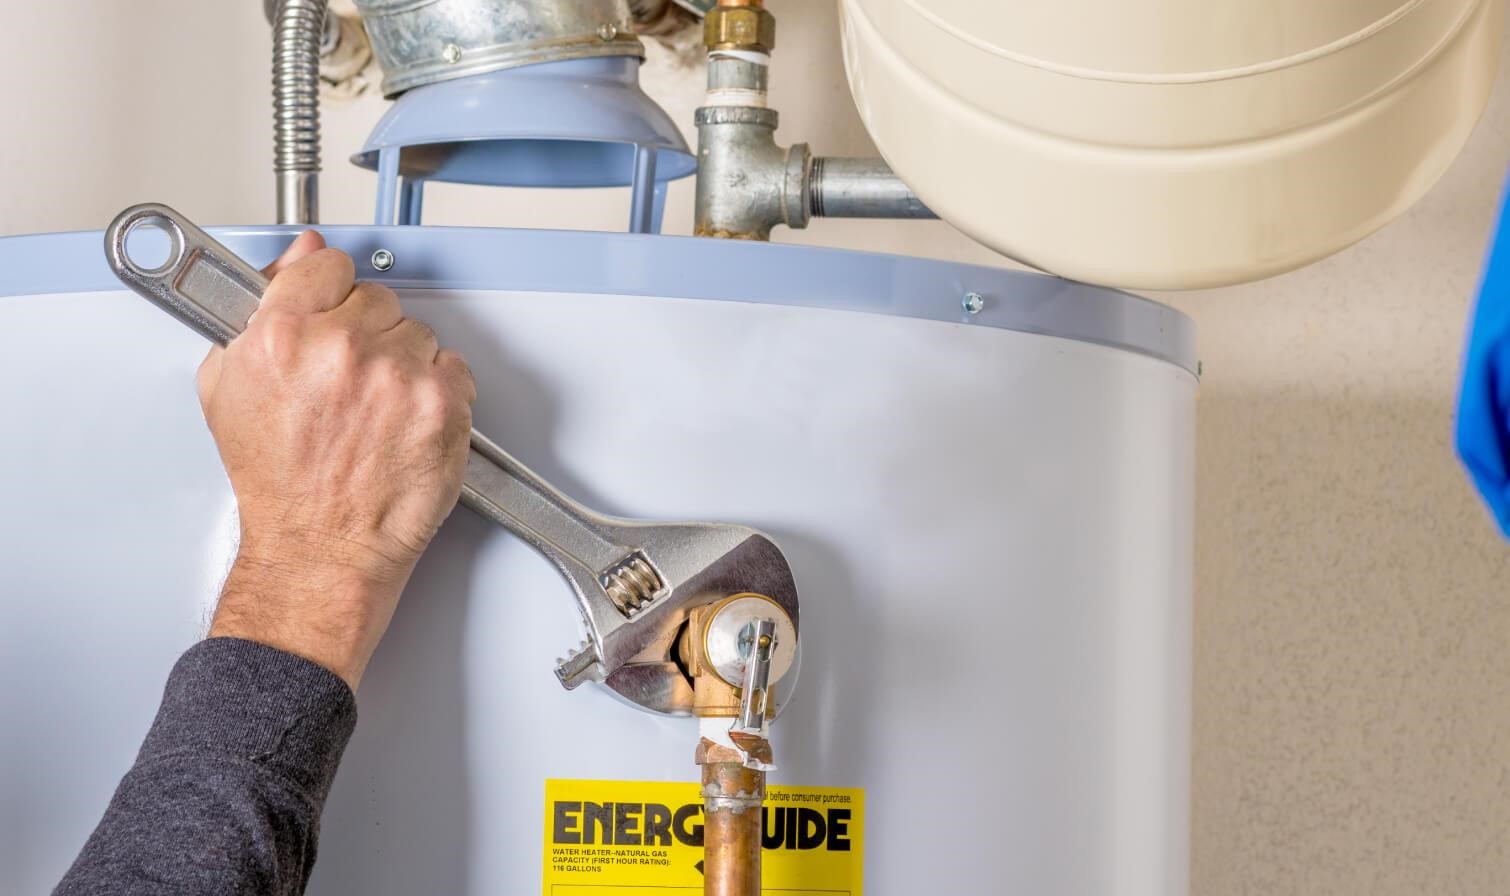 Tips to Avoid Water Heater Catastrophes